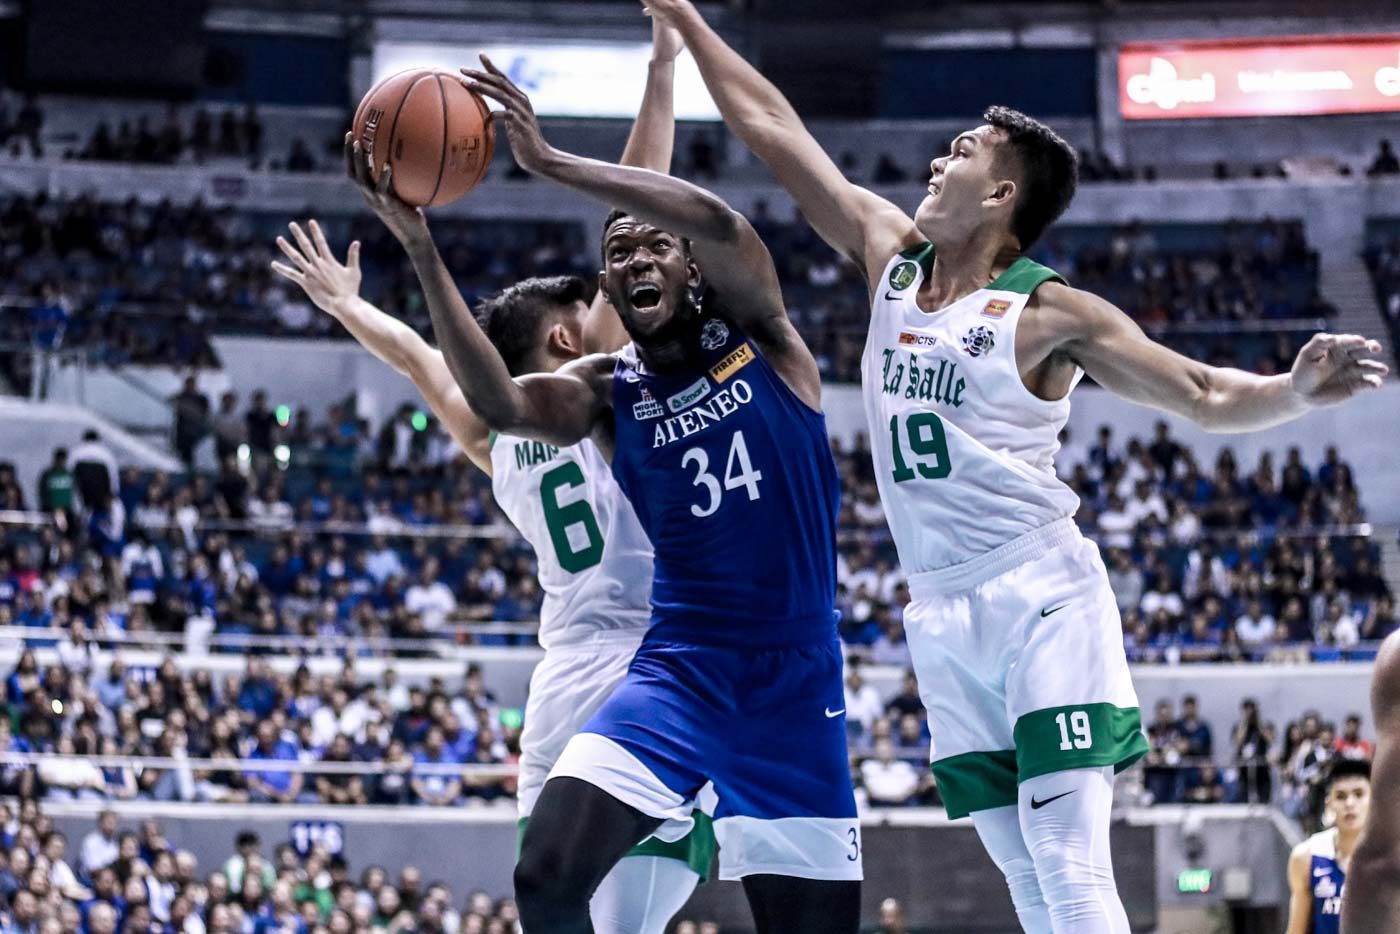 Ateneo still too much for new-look La Salle